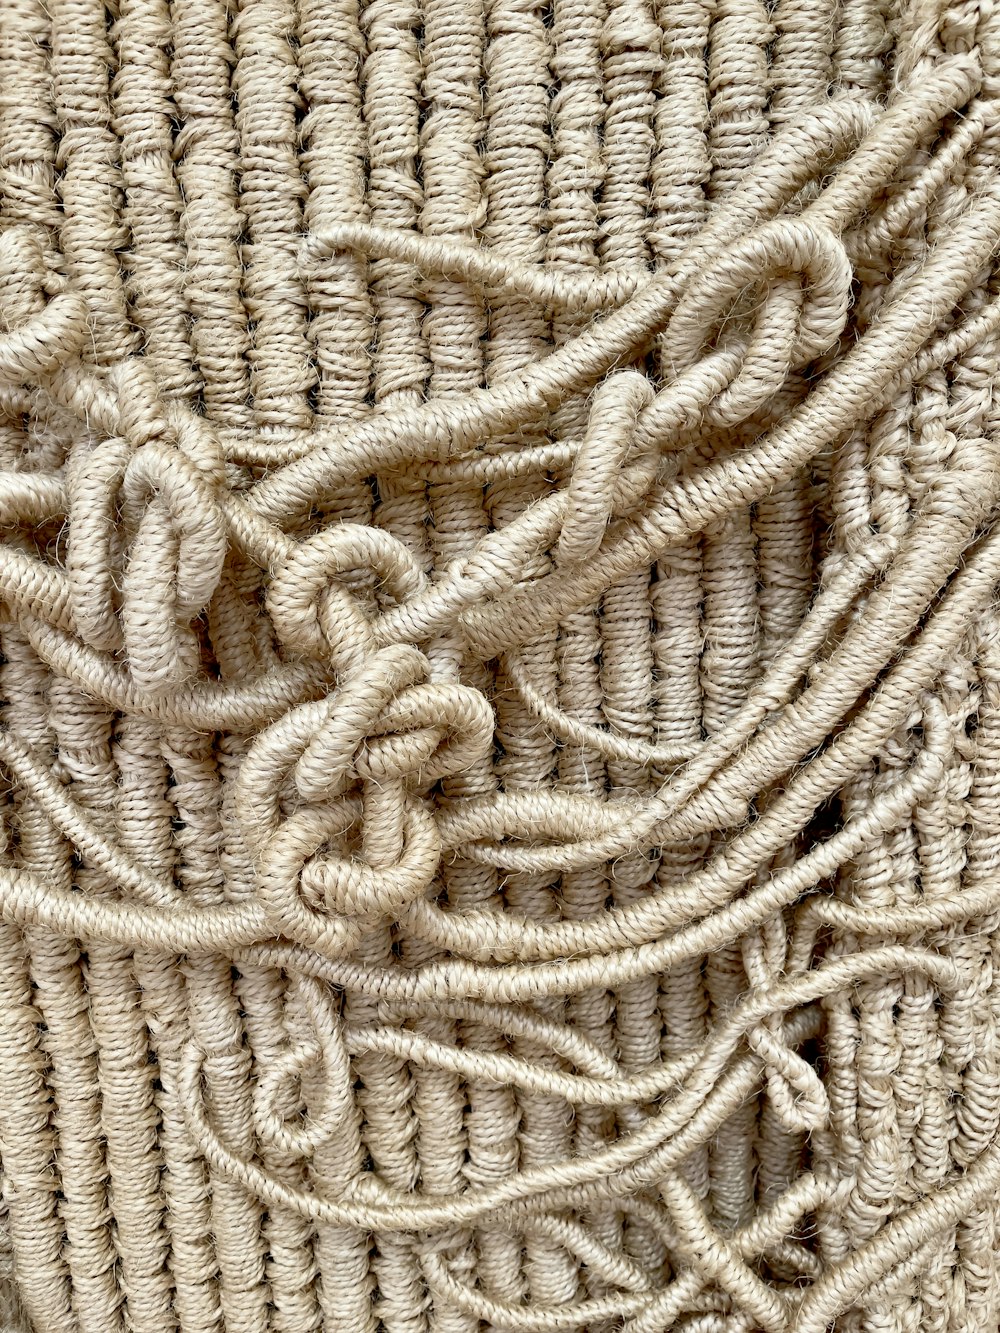 a close up view of a woven material